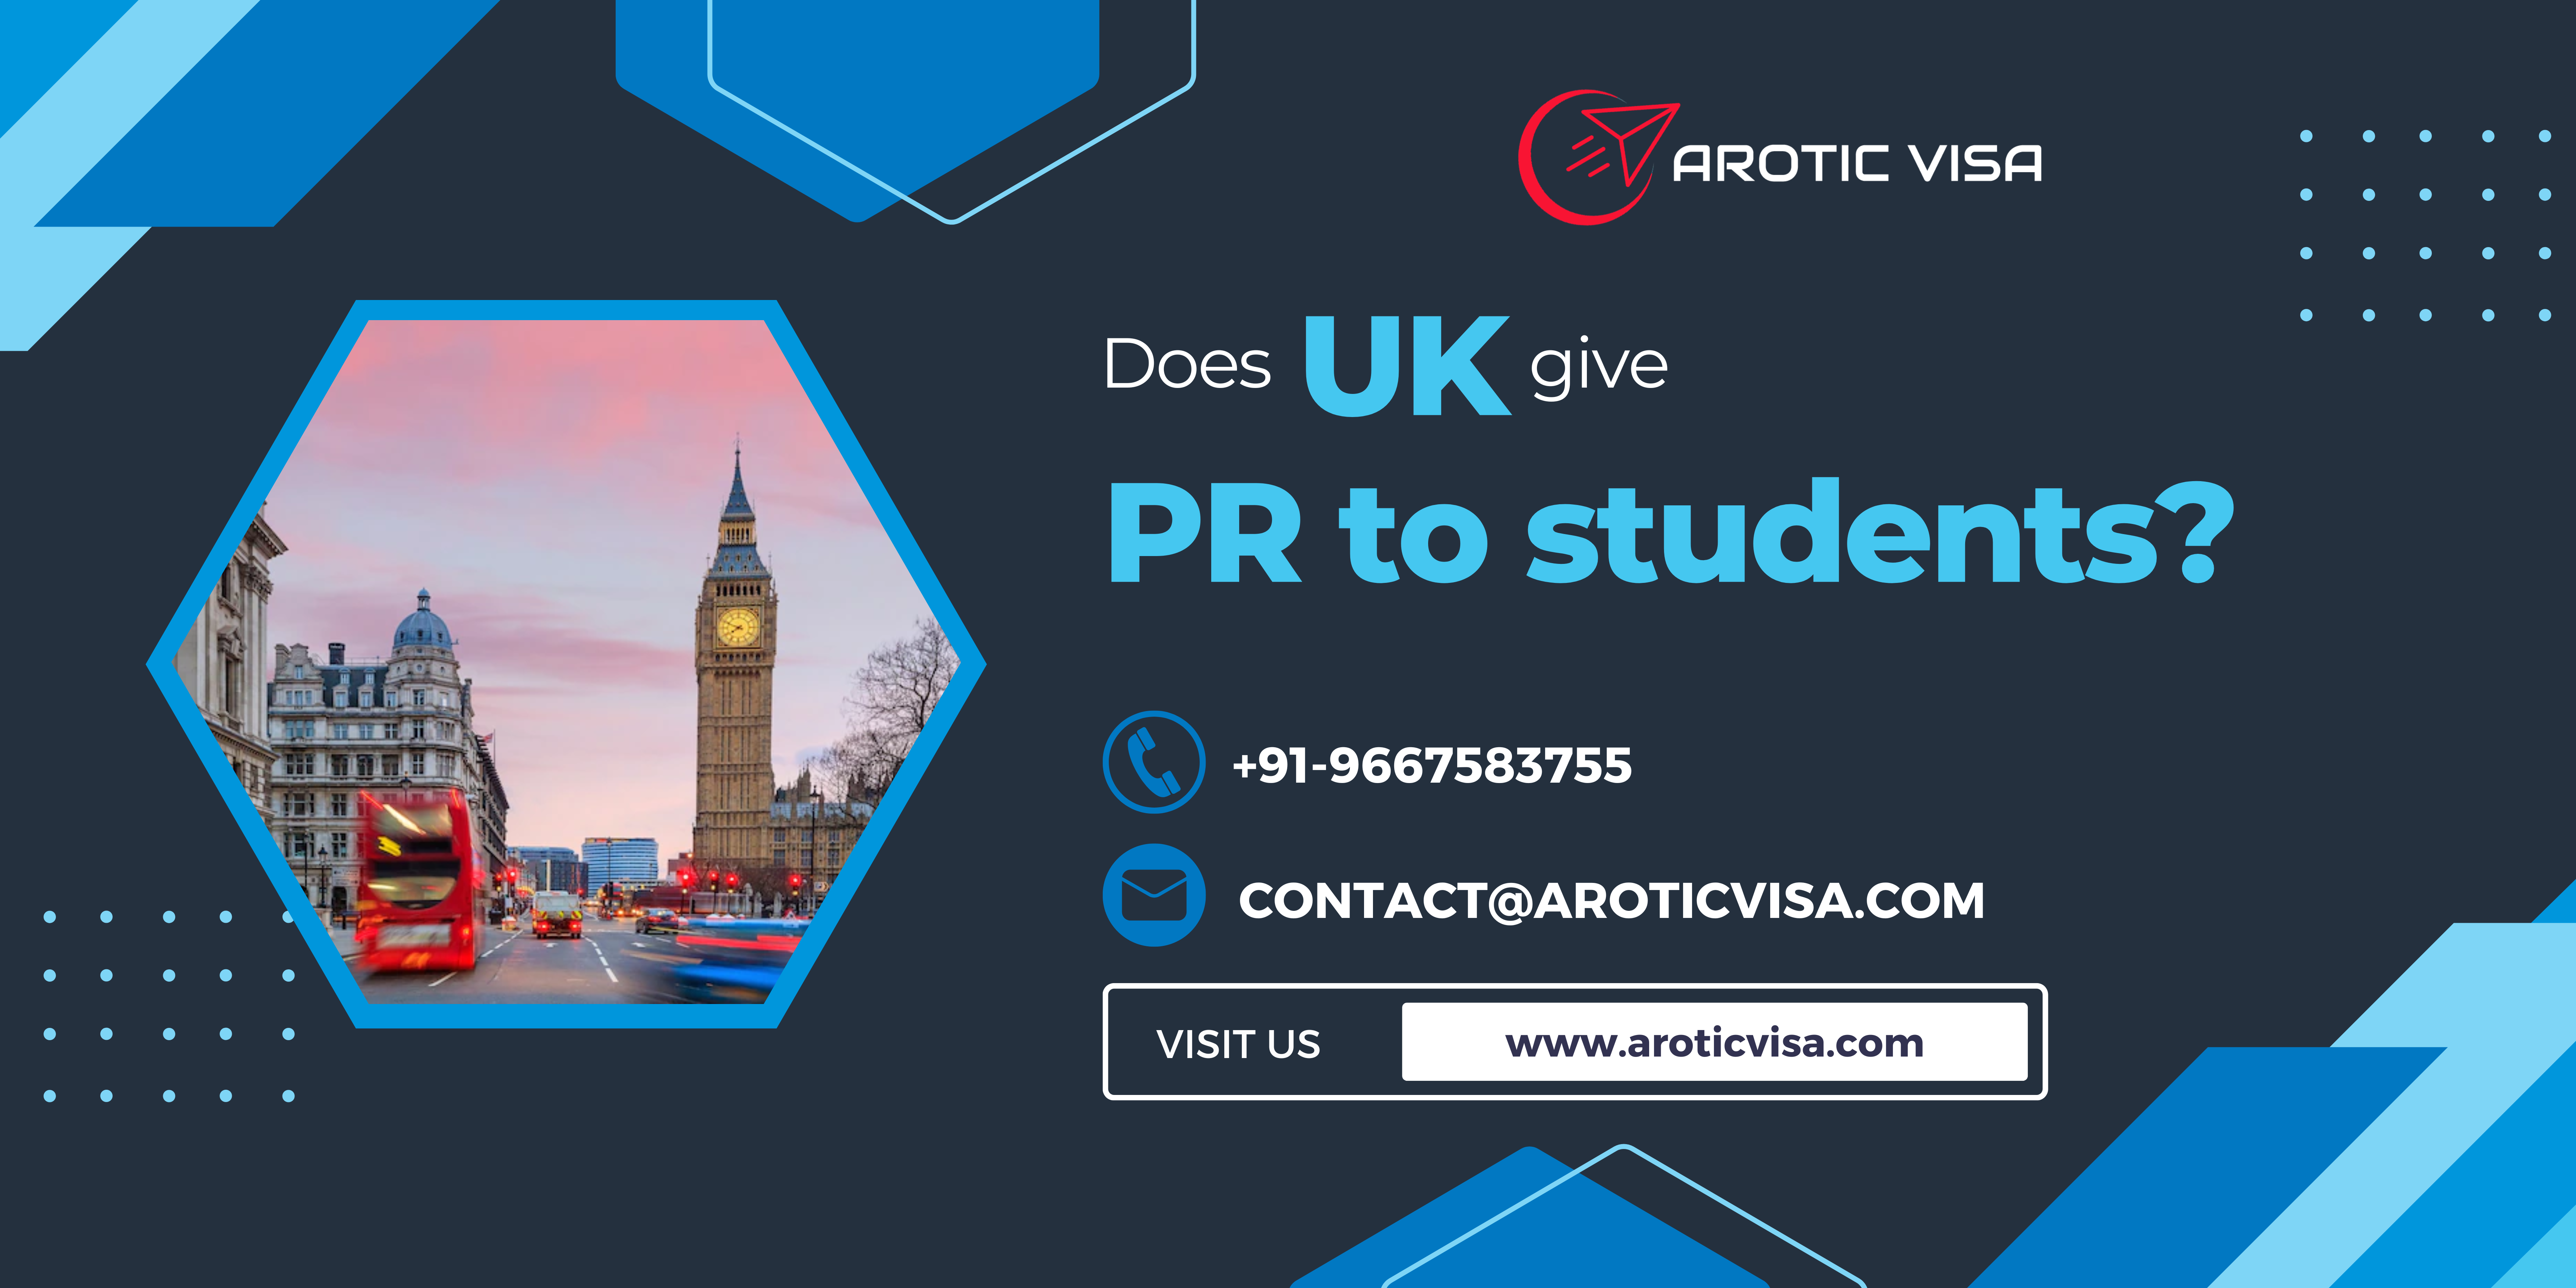 Does UK give PR to students?<br>